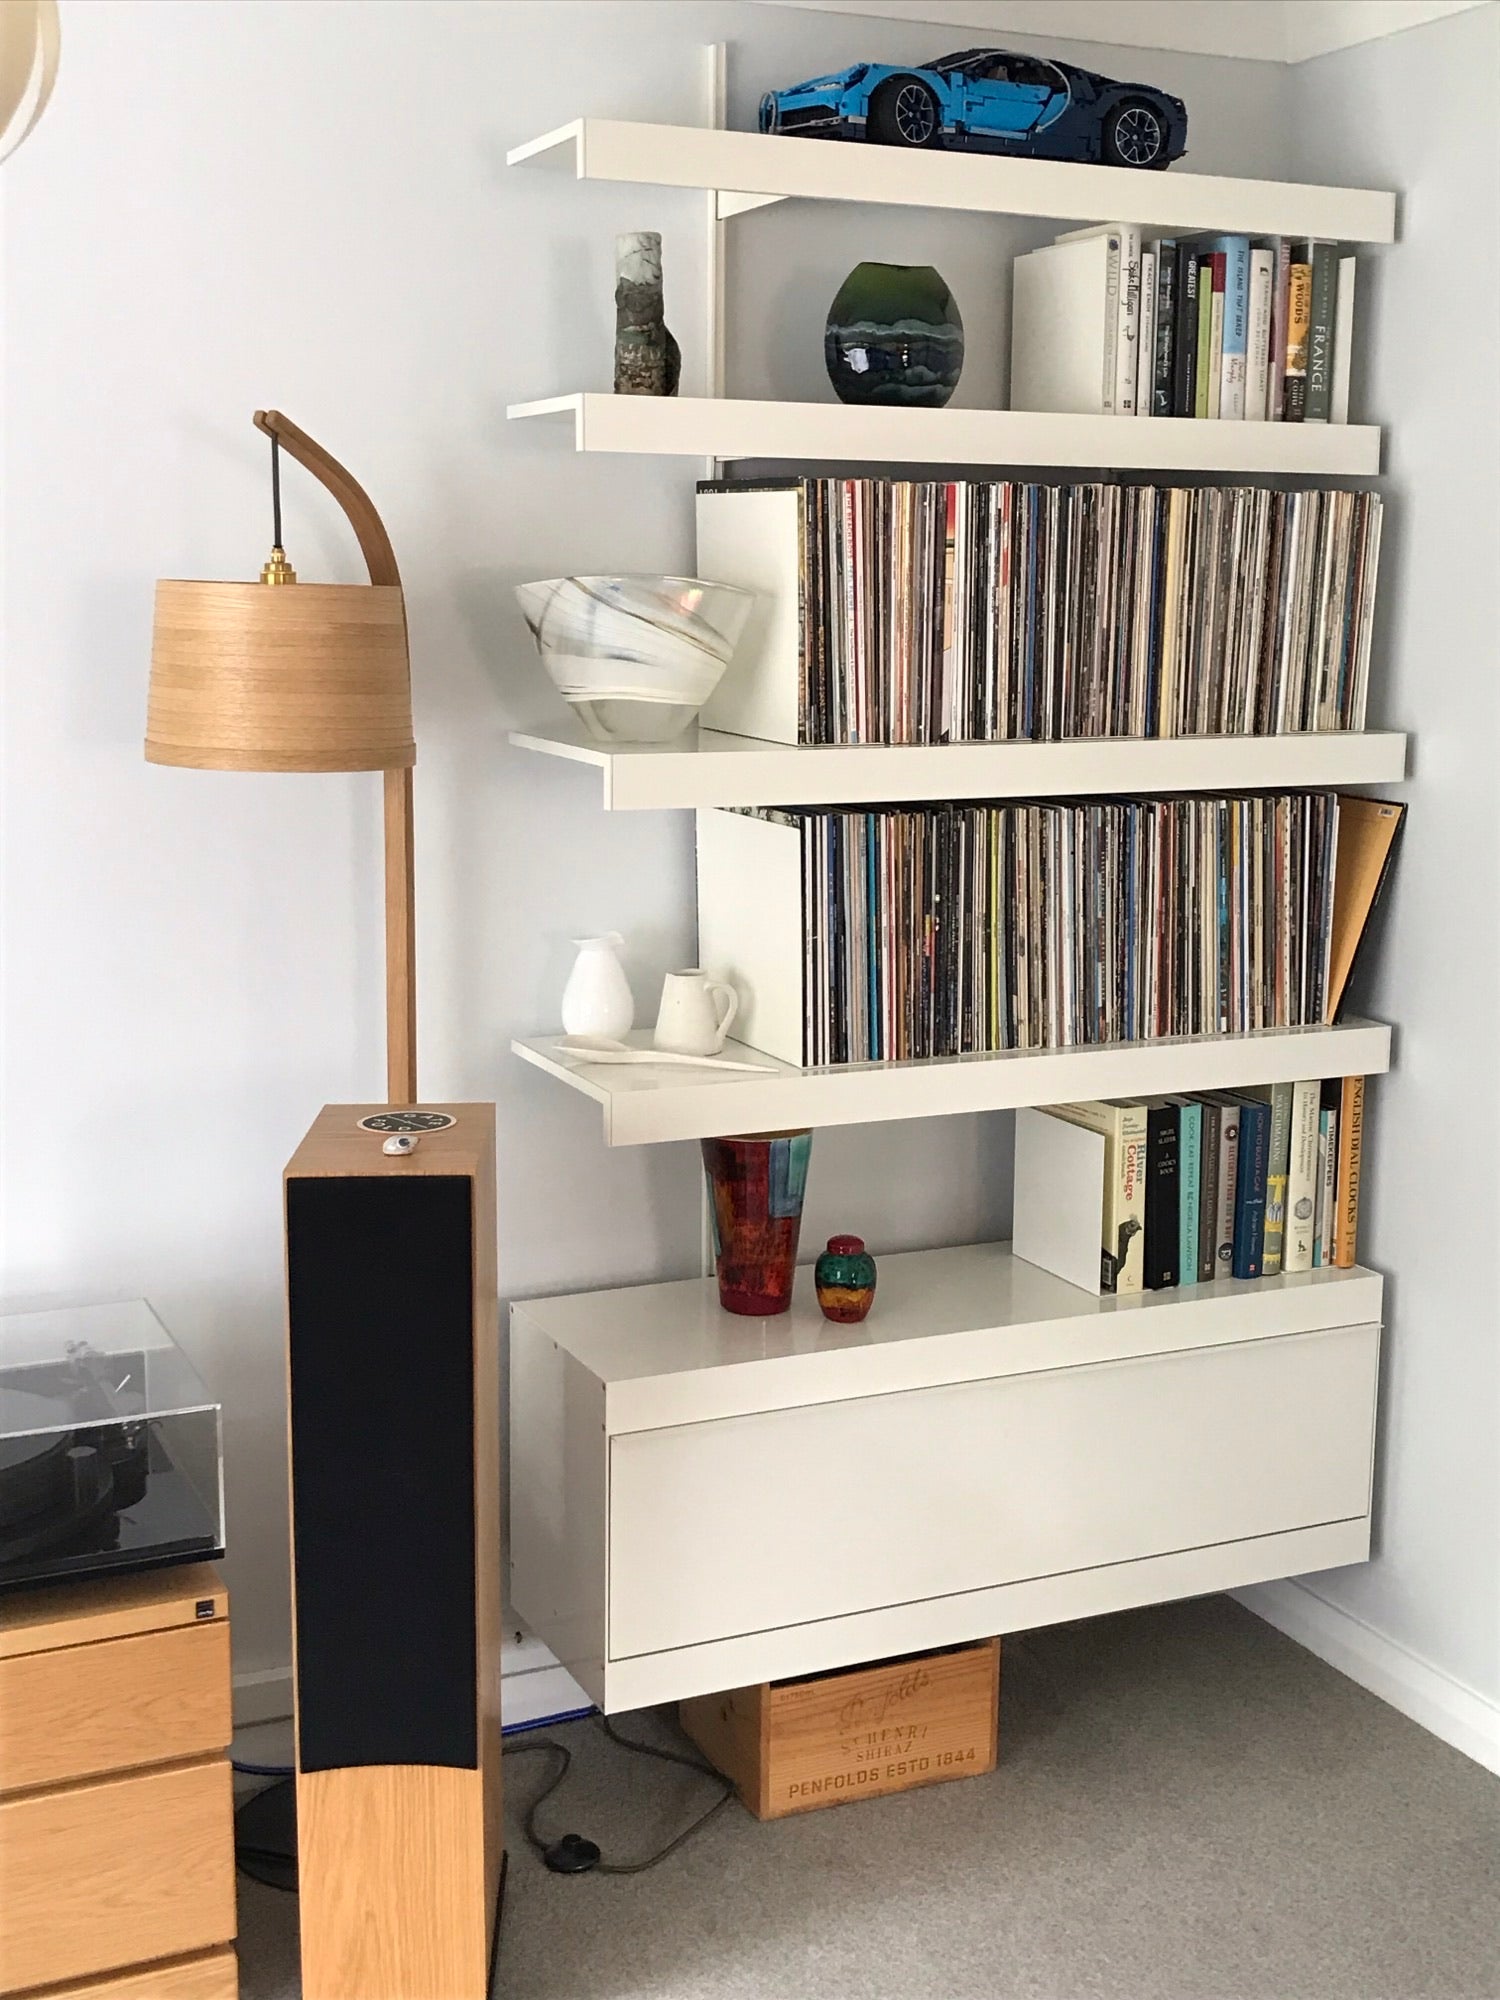 Vinyl collection wall mounted on shelving system with shelves and white cabinet